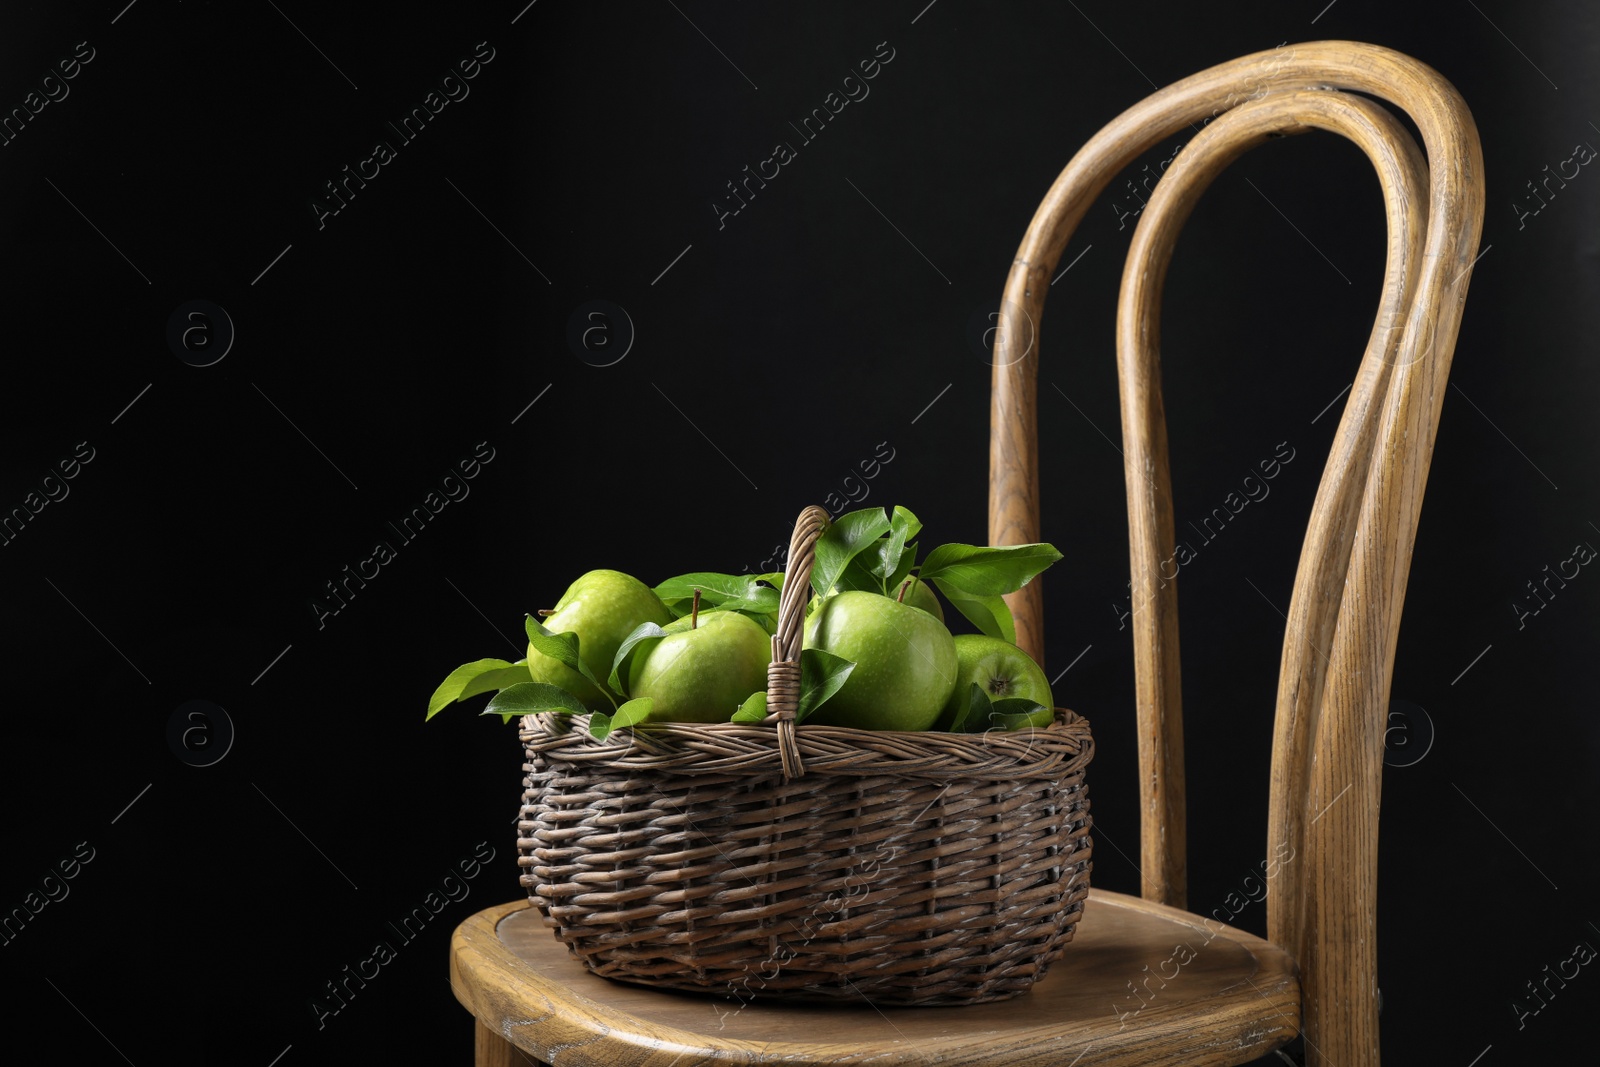 Photo of Fresh ripe green apples and leaves in wicker basket on wooden chair against black background